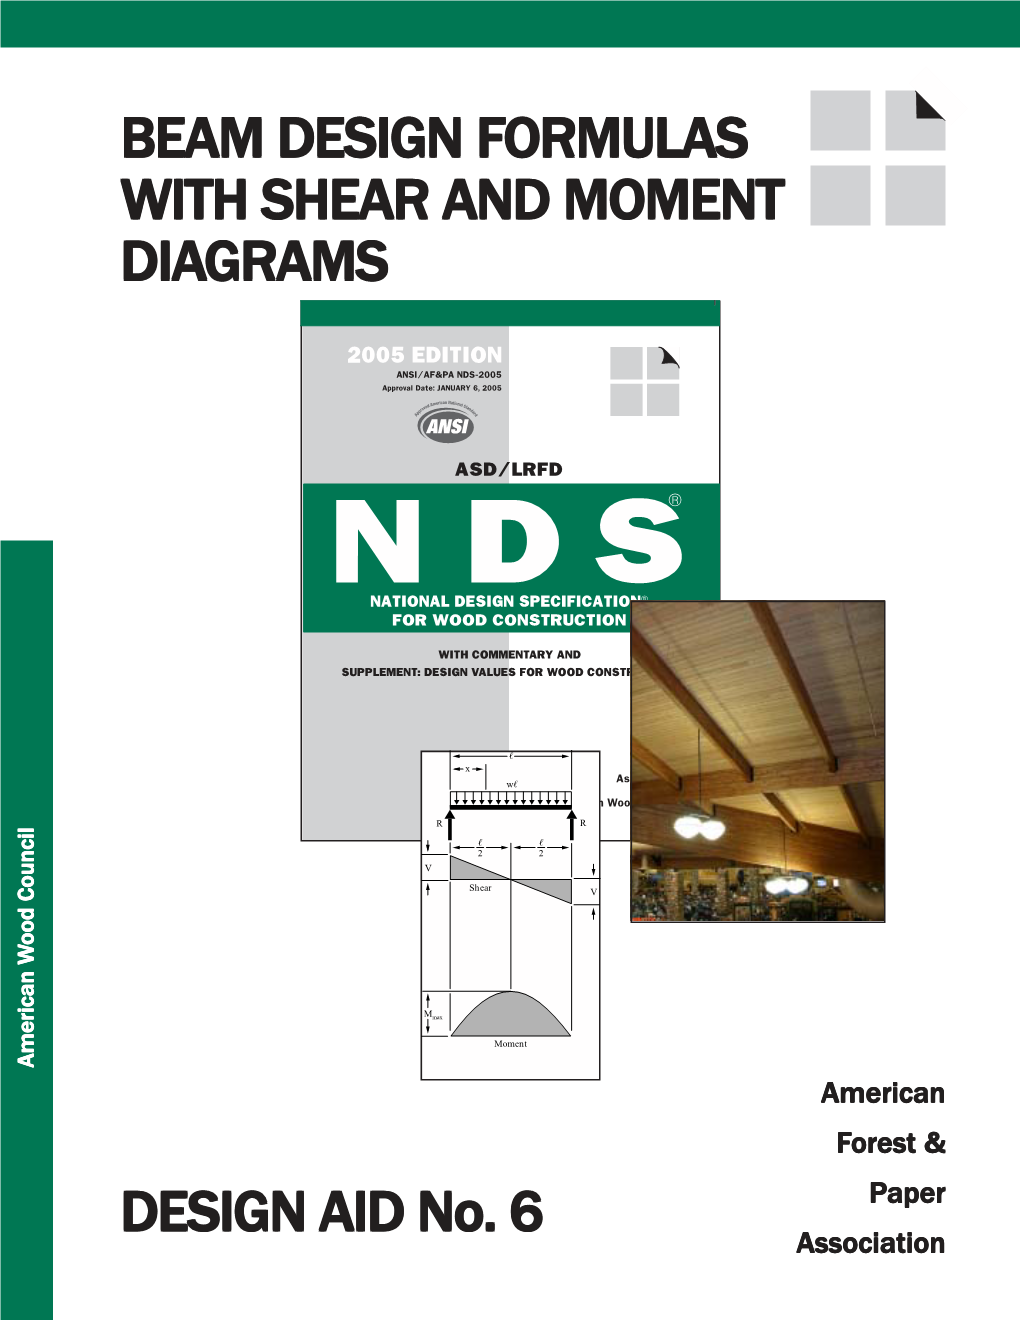 Design Aid 6 Beam Design Formulas with Shear and Moment Diagrams